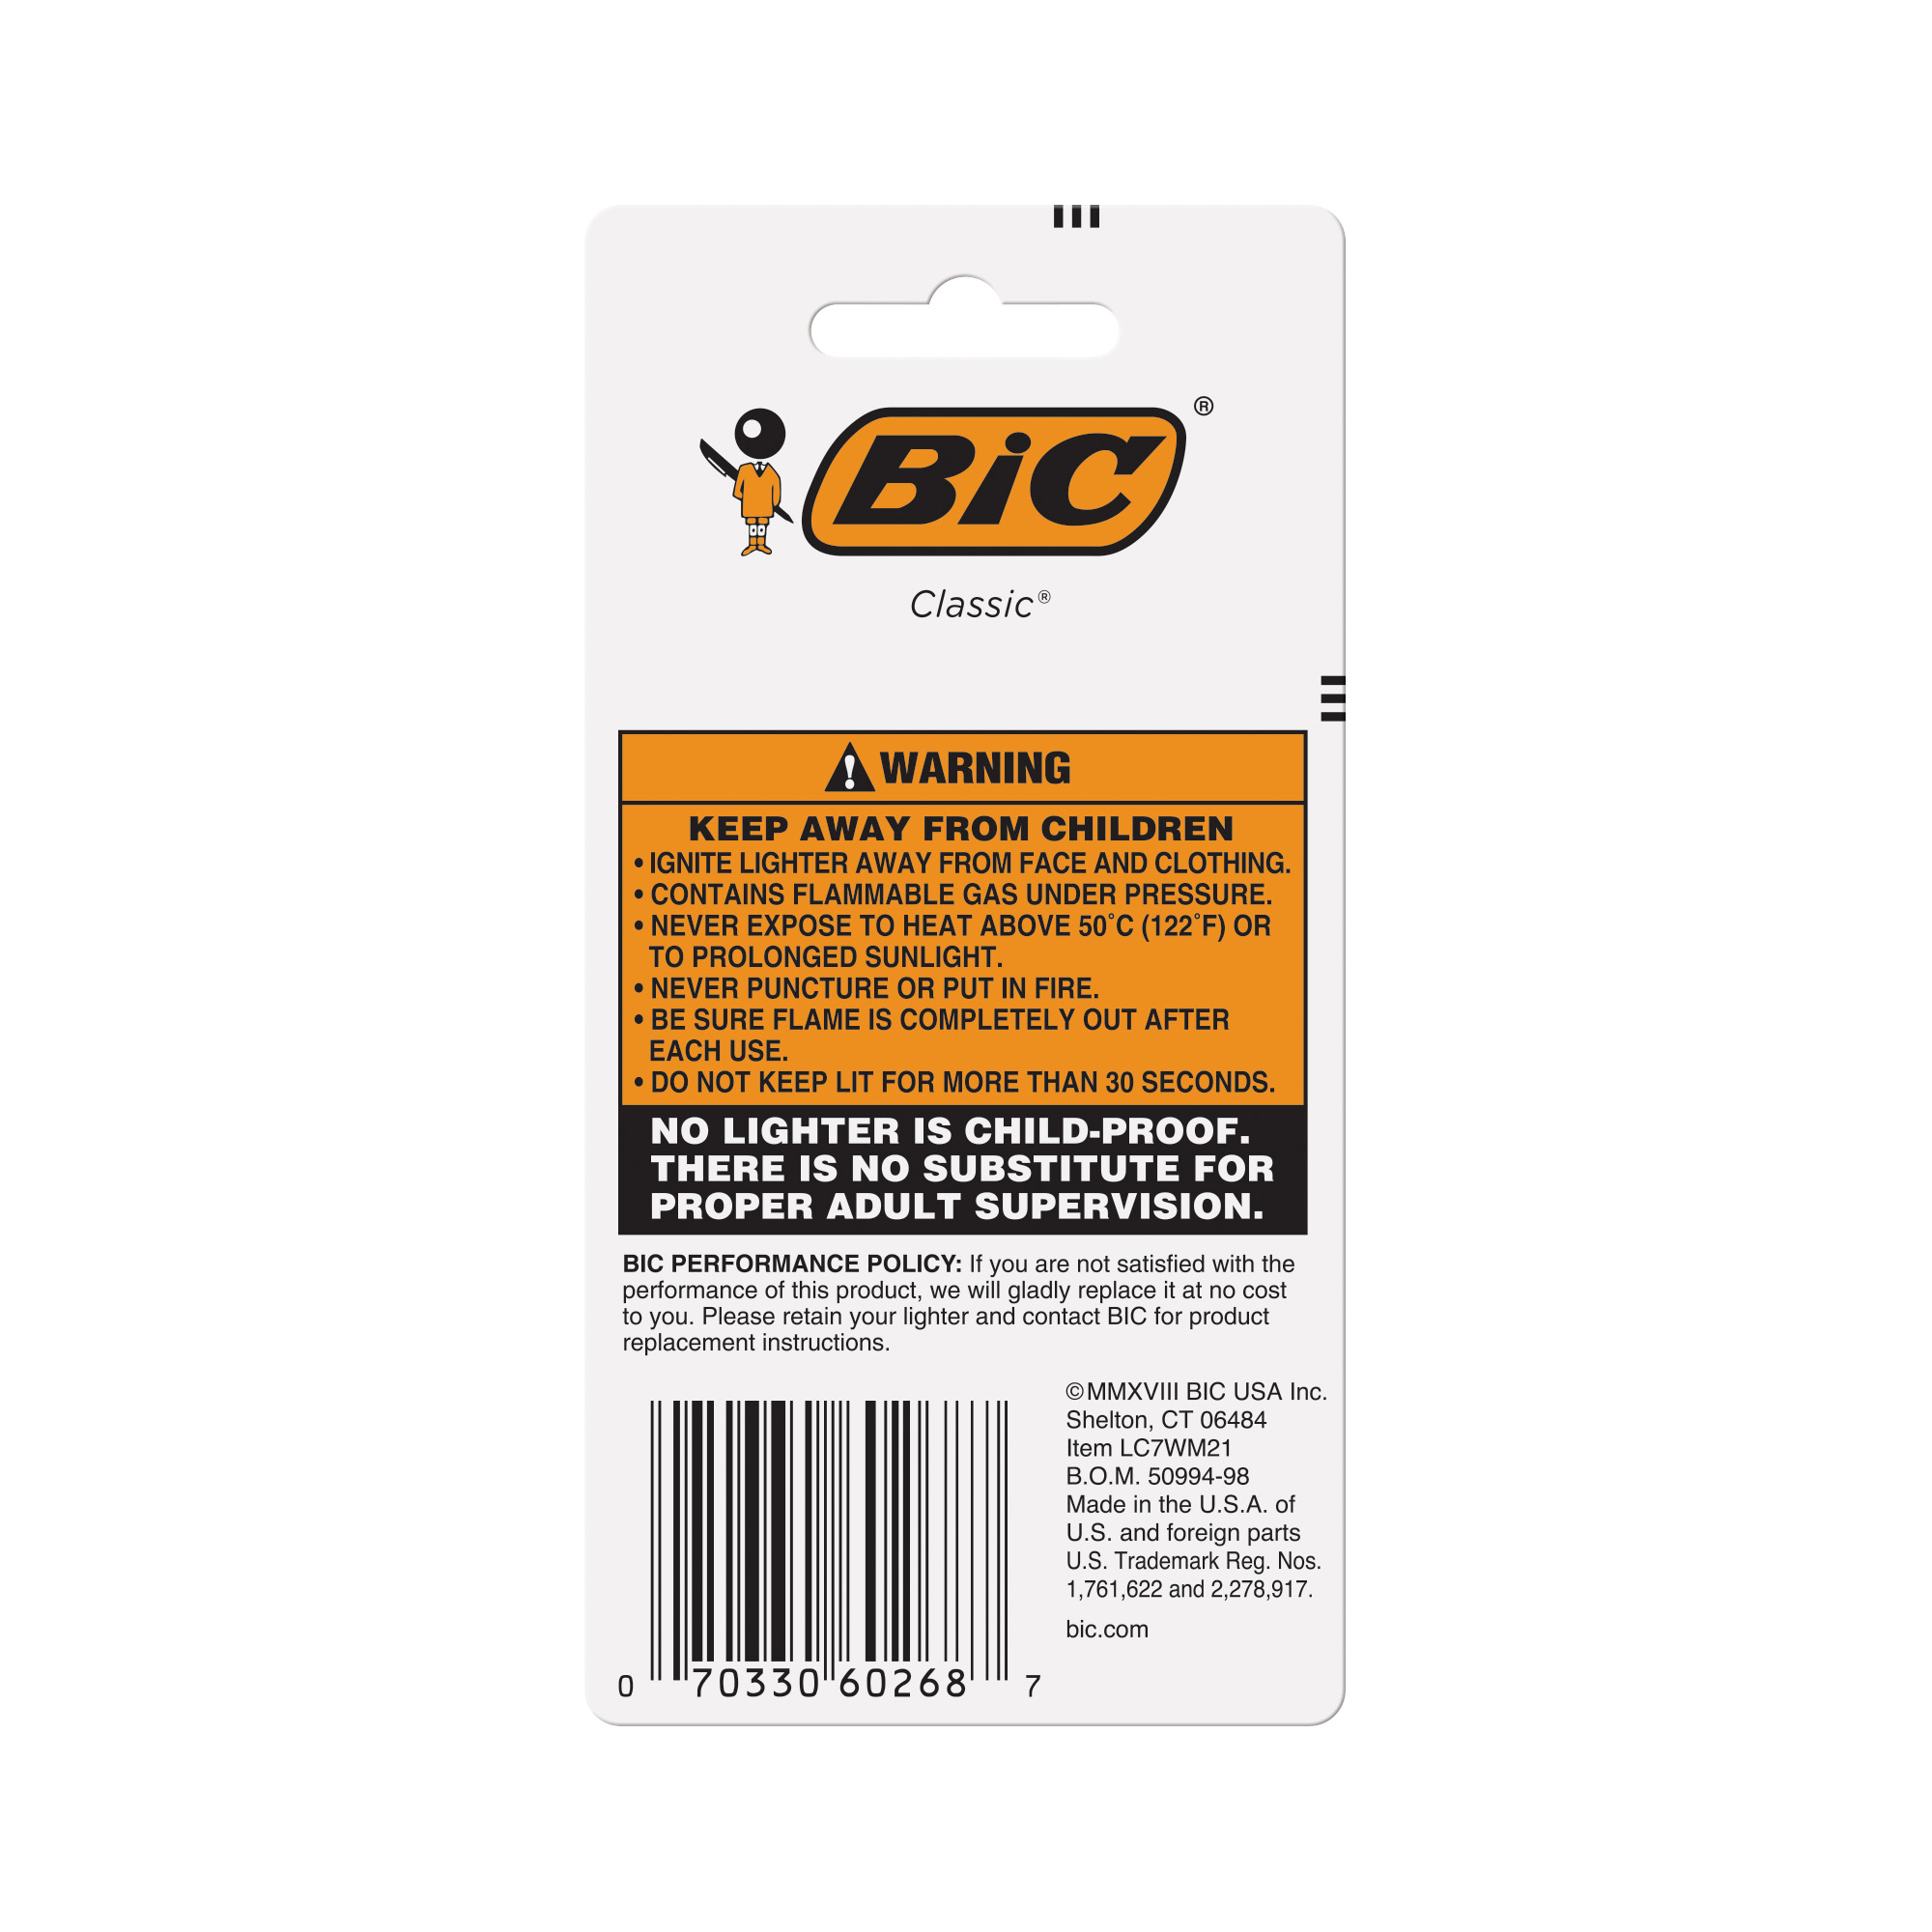 BIC Classic Pocket Lighter, Assorted Colors, 2 Pack - image 7 of 7